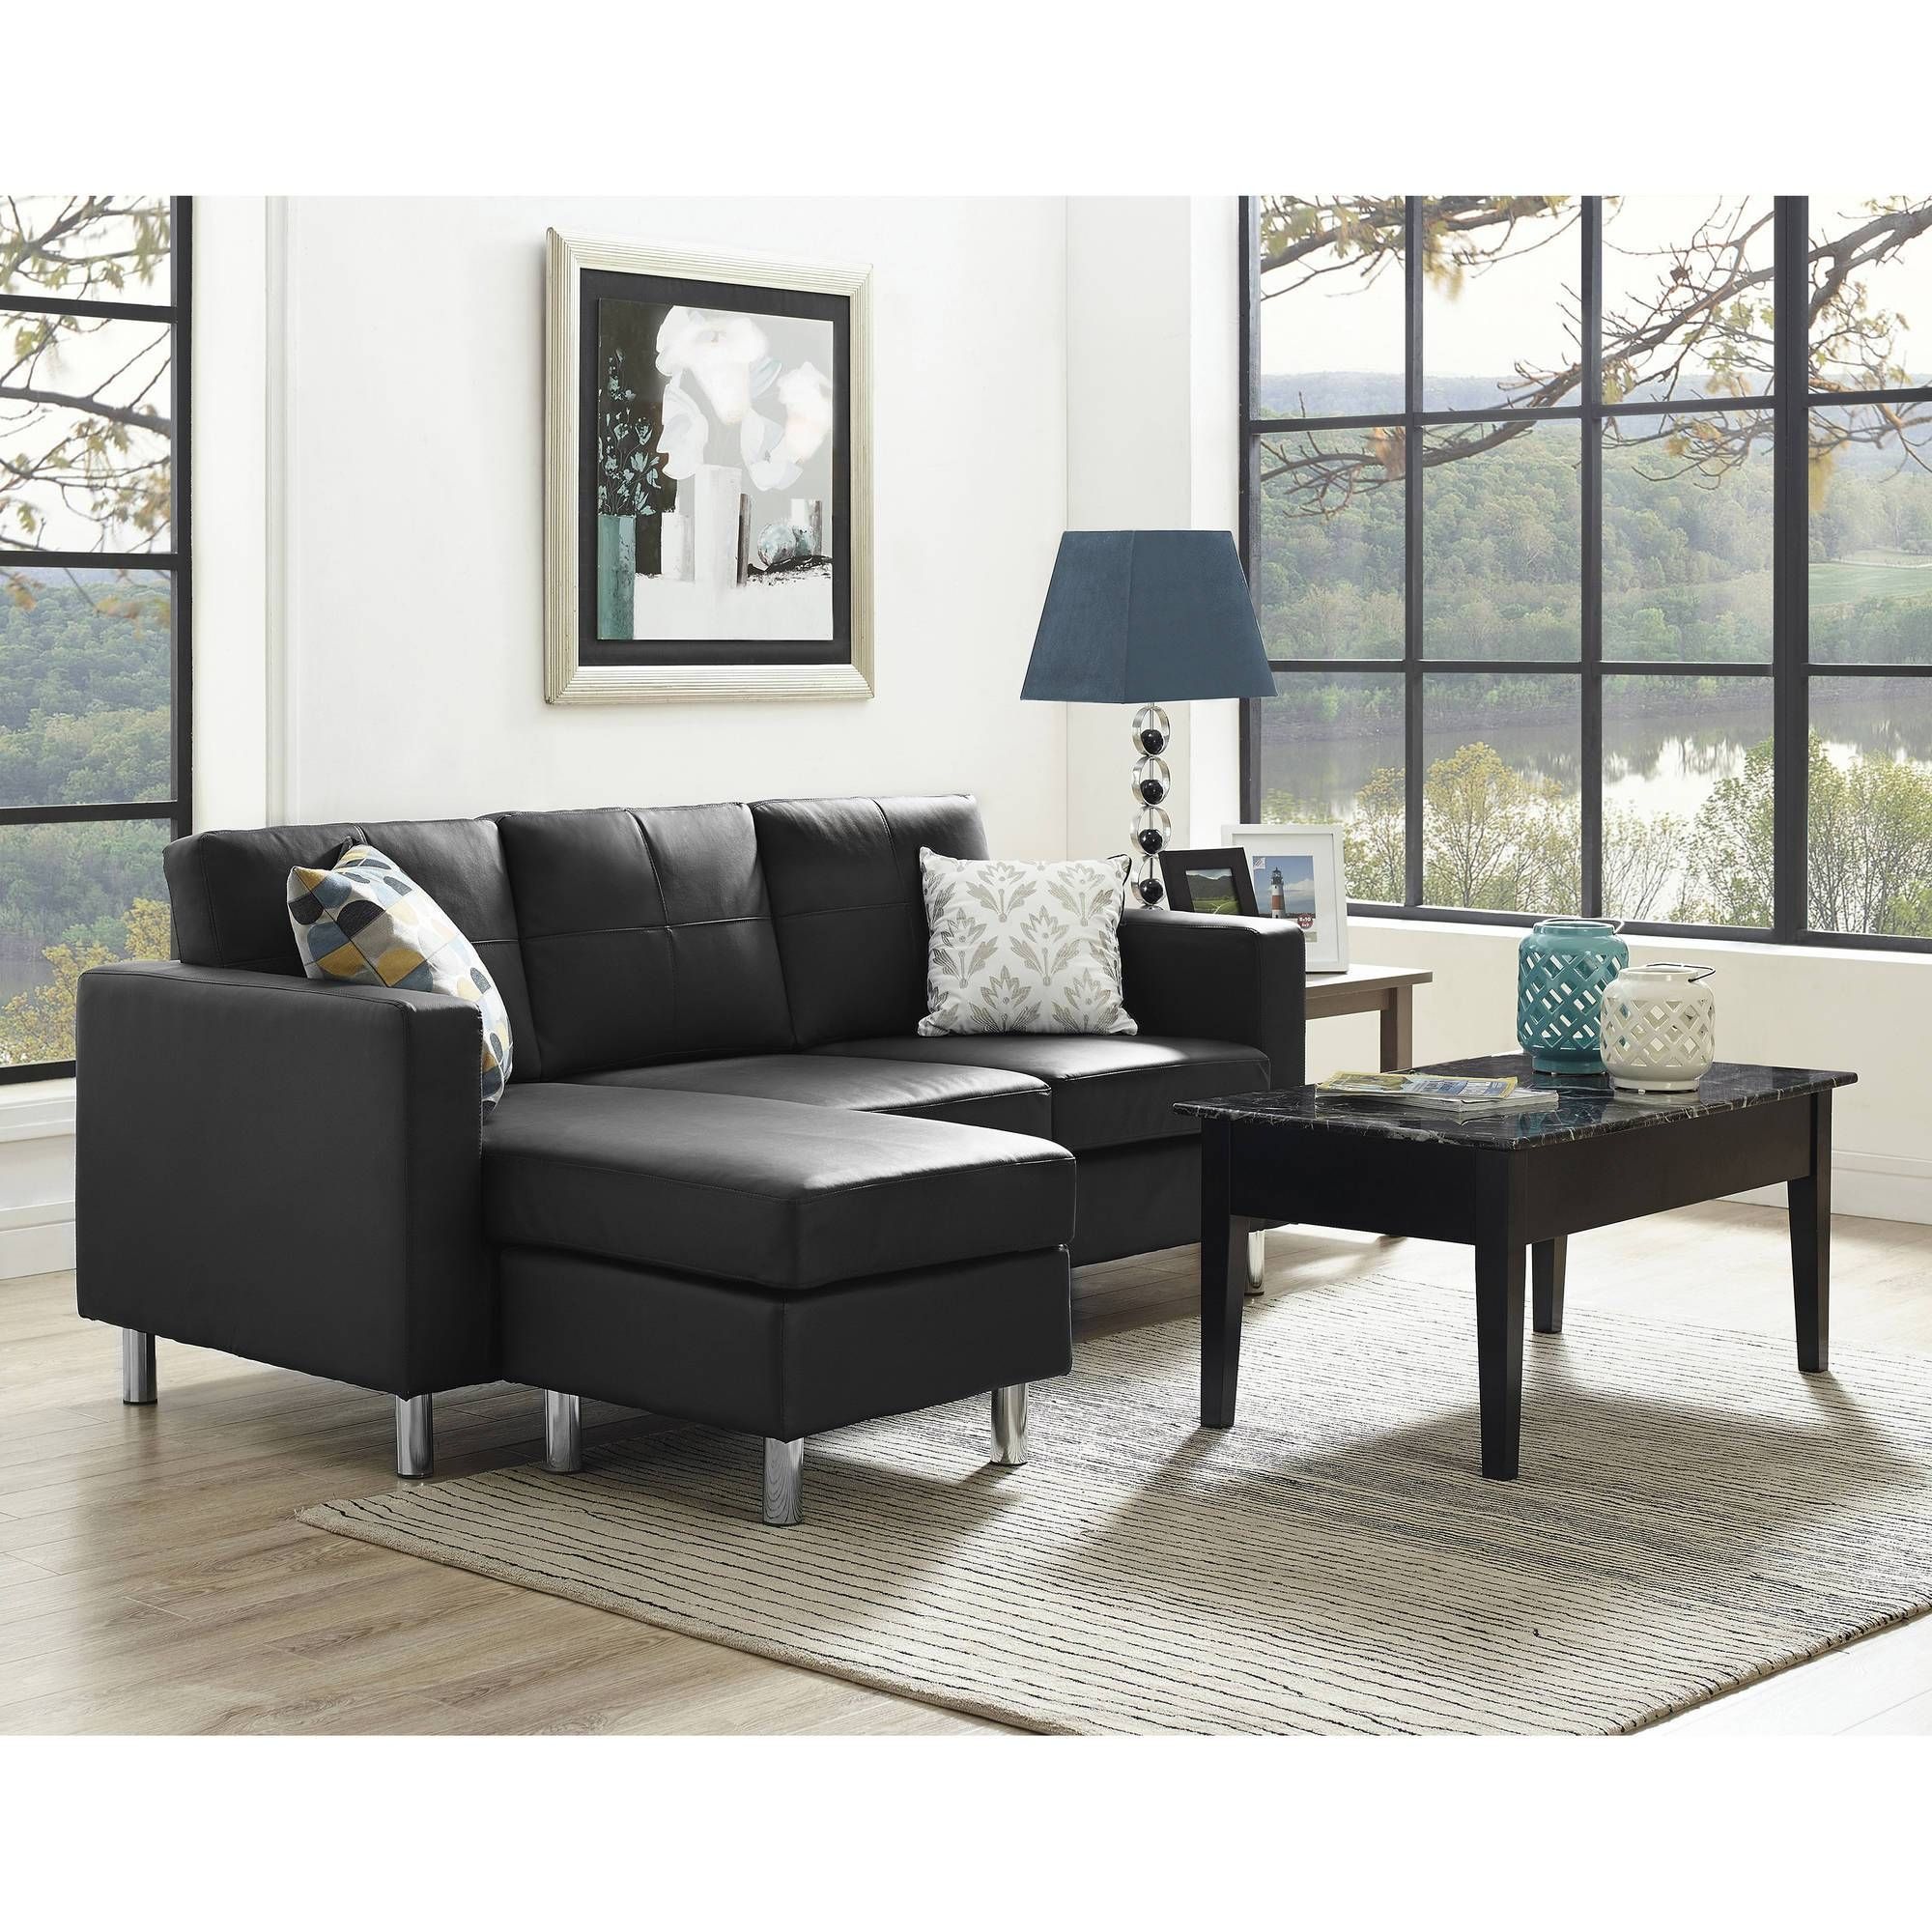 Dorel Living Small Spaces Configurable Sectional Sofa, Multiple Within Sectional Sofas In Small Spaces (Photo 2 of 25)